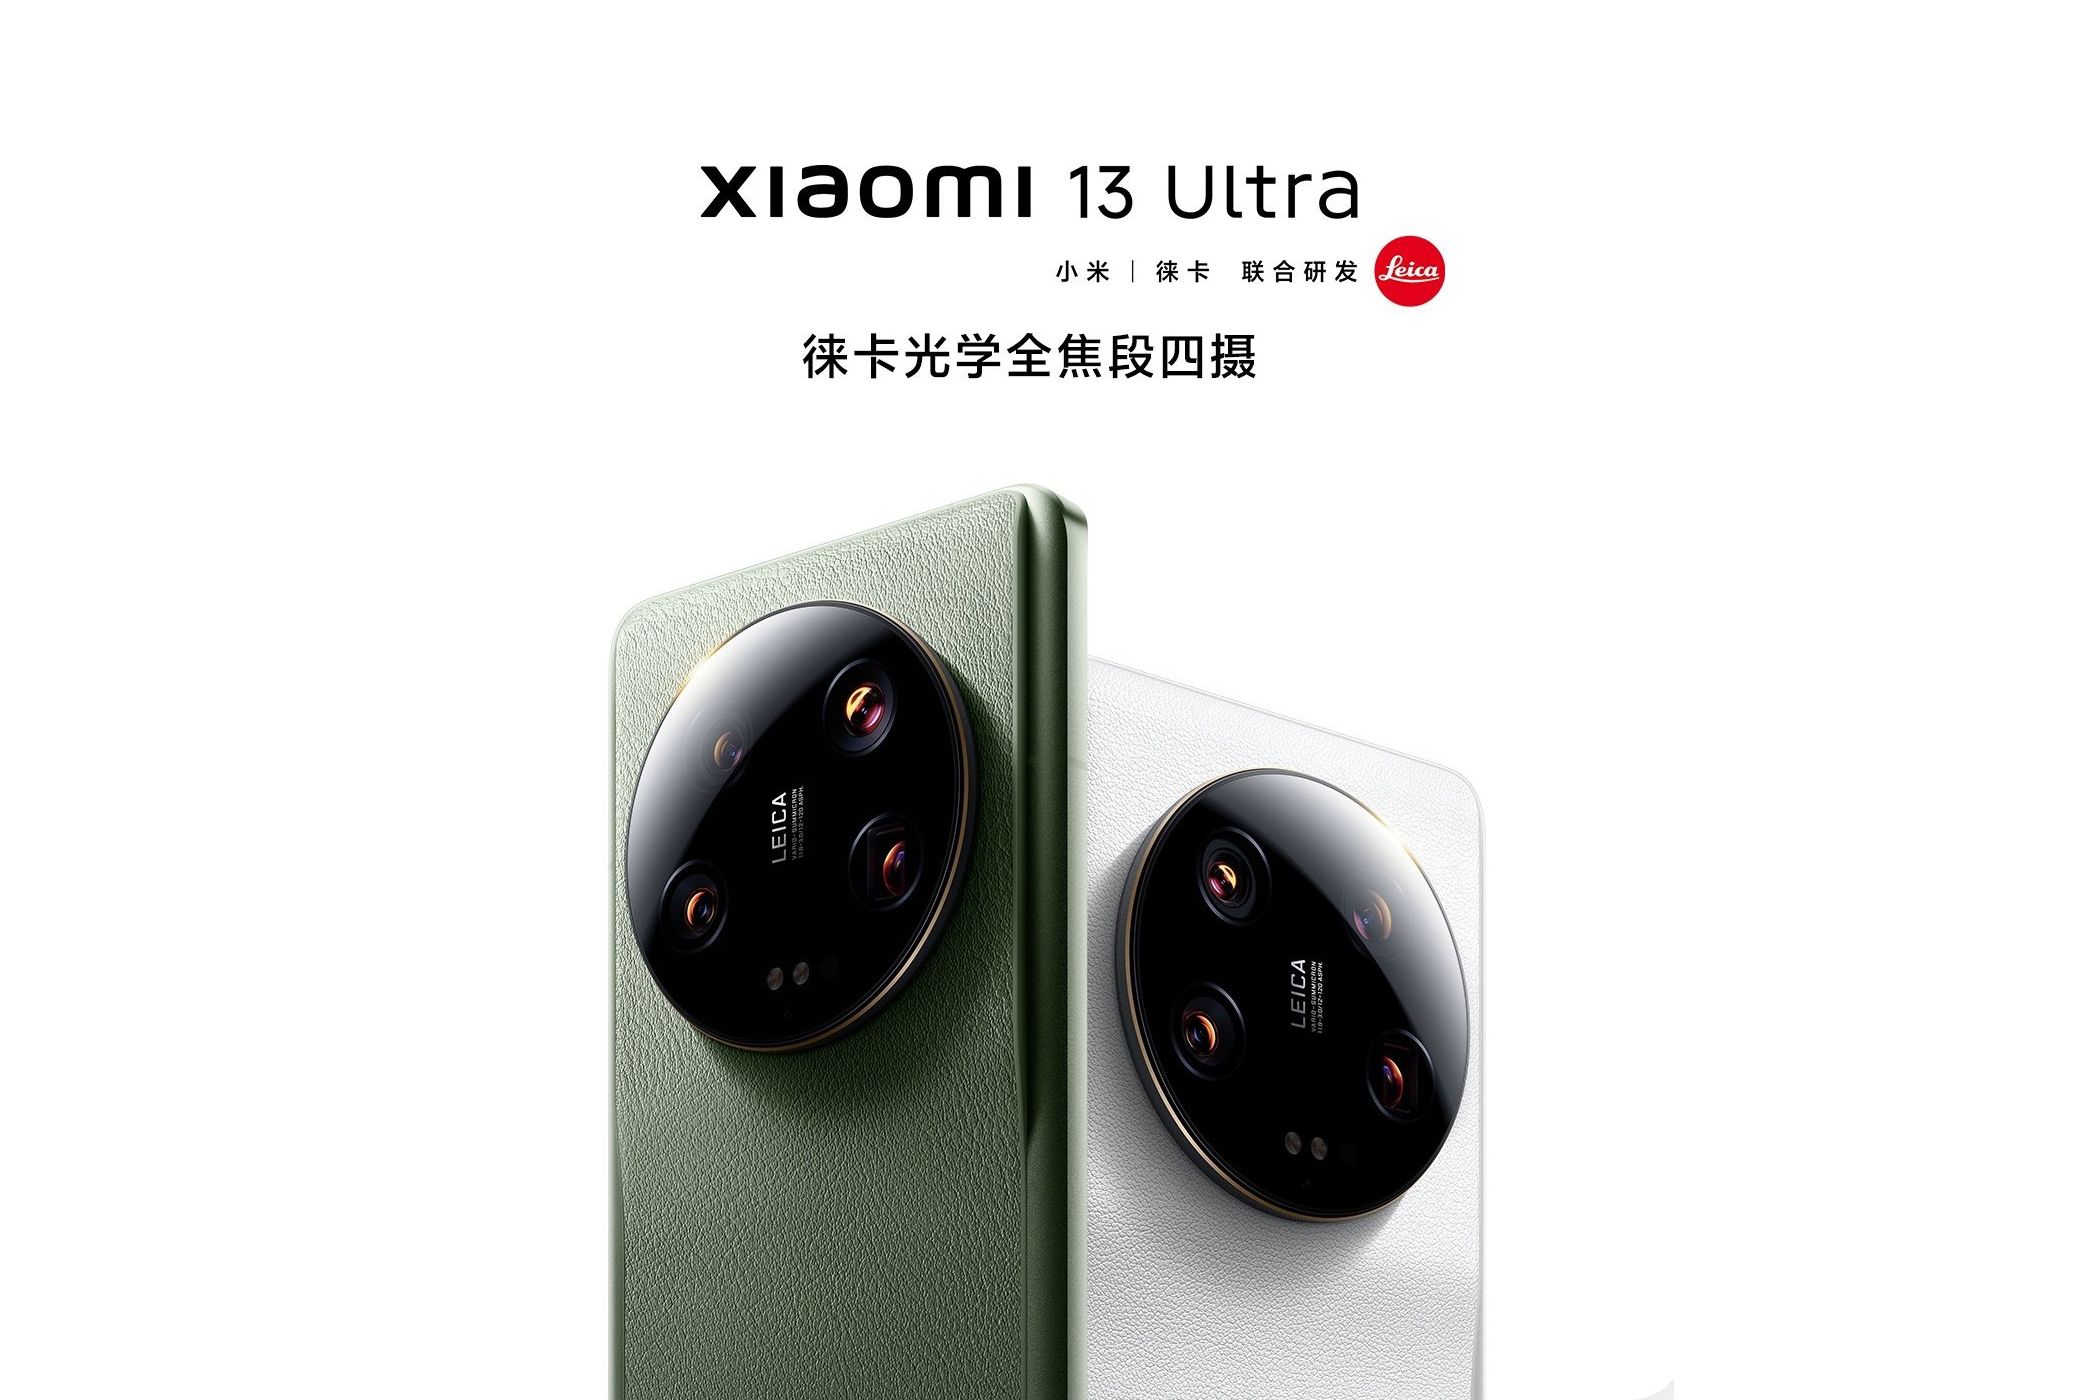 Xiaomi 13 Ultra launch poster on white background.